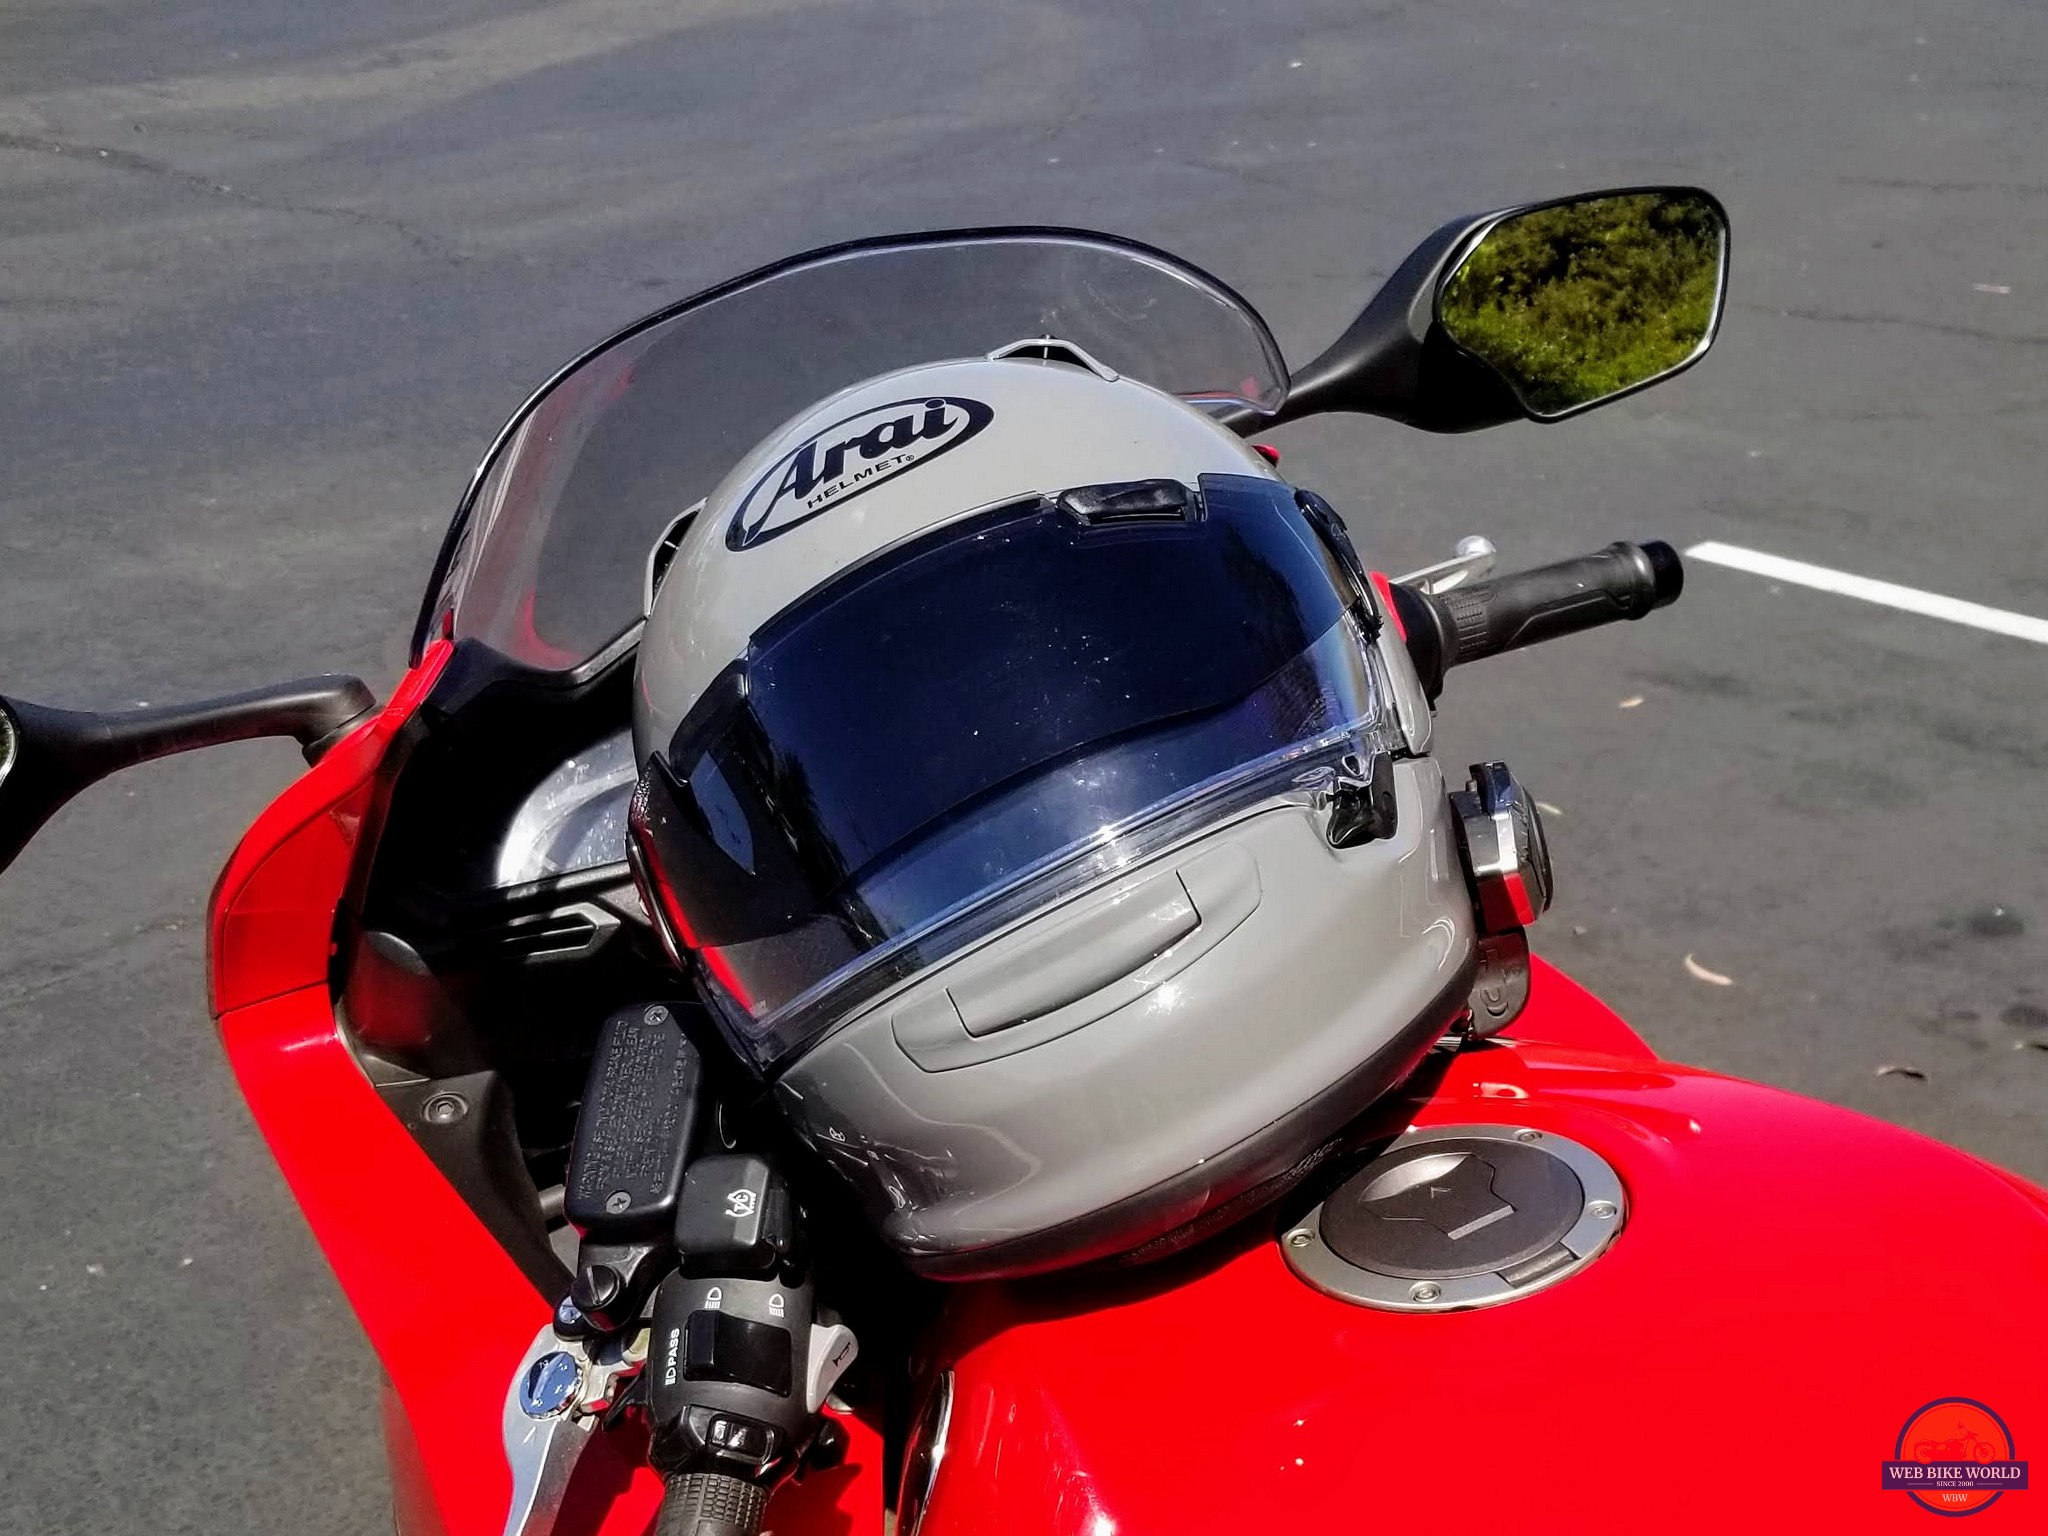 Regent-X with Arai Pro Shade System and comm system